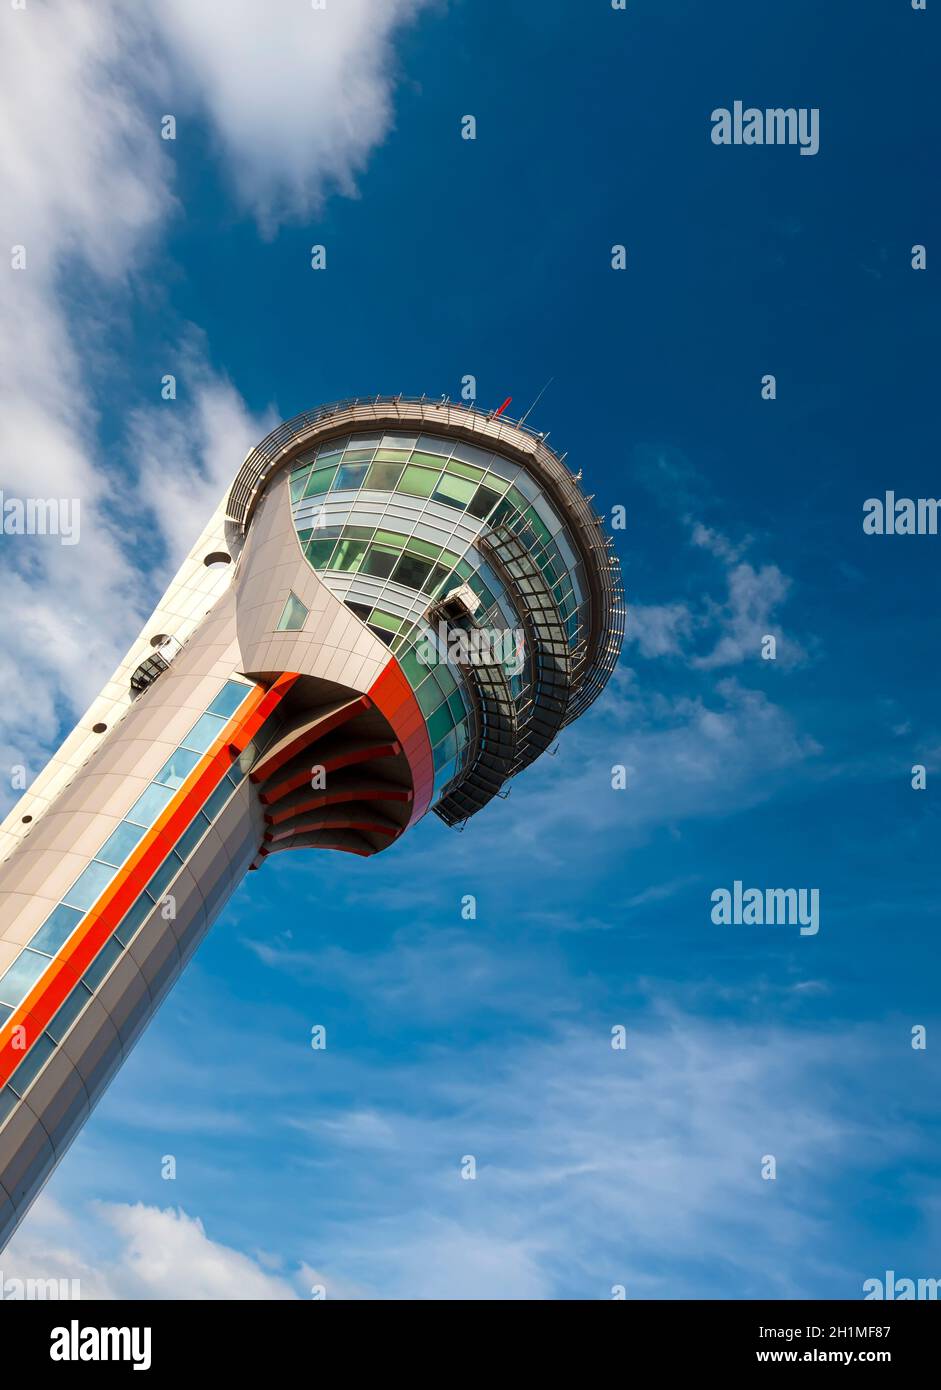 The tower in airport in Moscow. The tower against blue cloudy sky. Stock Photo